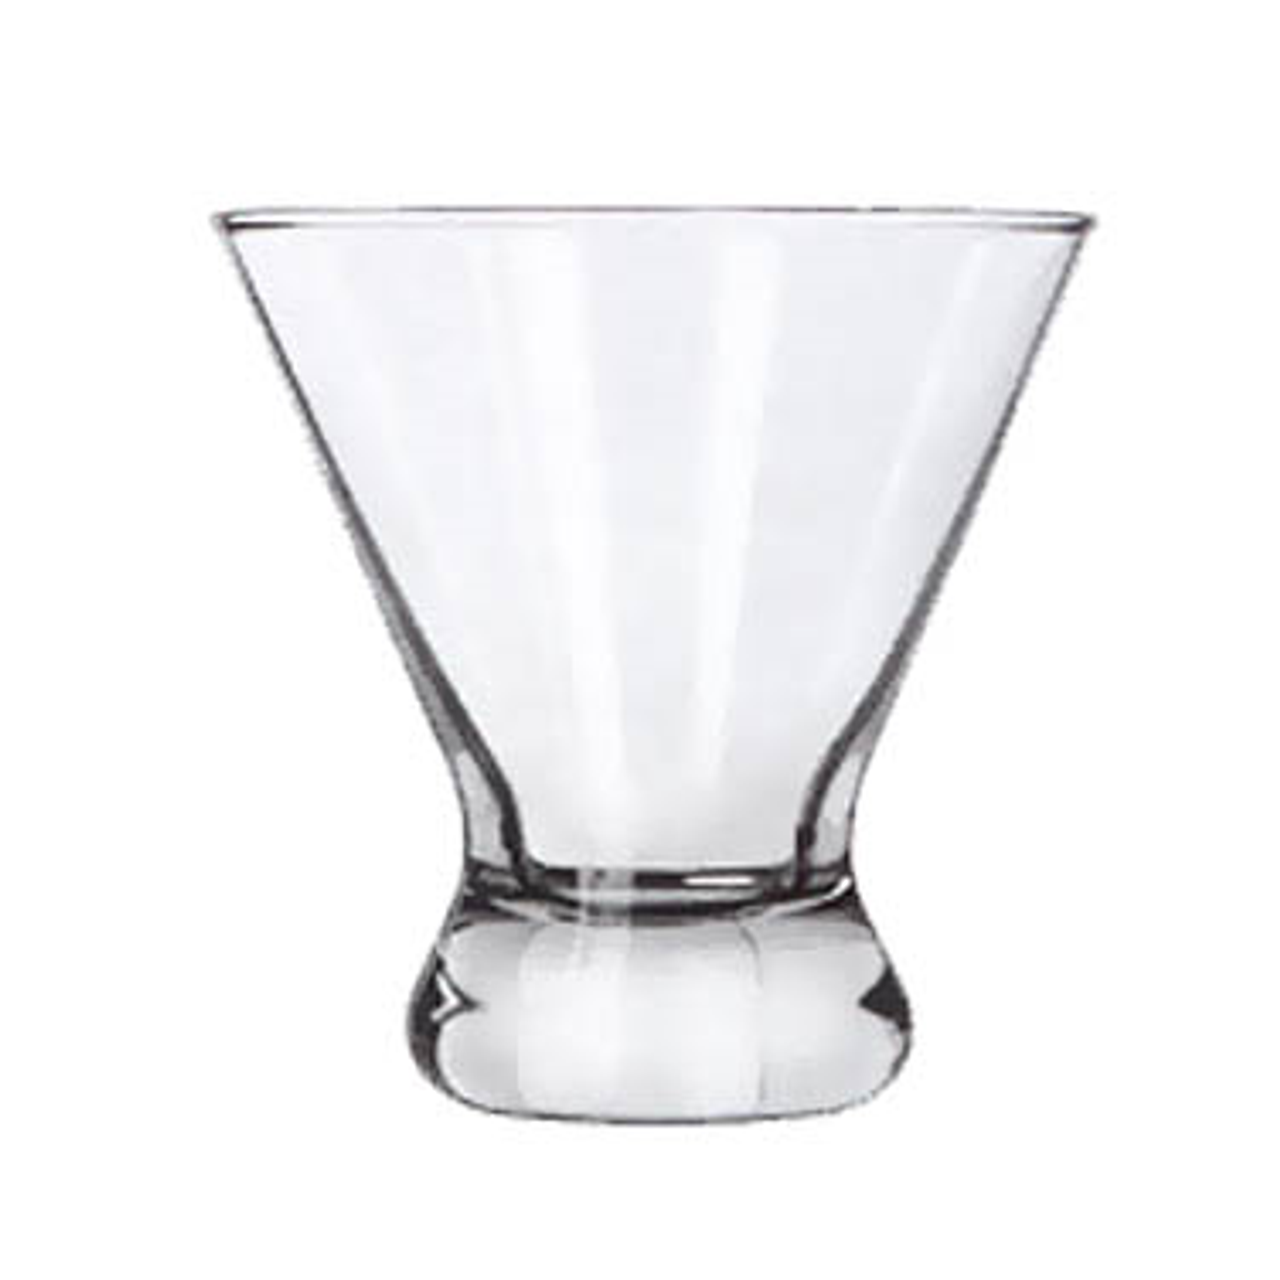 https://cdn11.bigcommerce.com/s-g3i86bef61/images/stencil/1280x1280/products/1029/4251/Libbey-402-Cosmopolitan-Double-Old-Fashioned-Glass__05647.1667505773.png?c=1